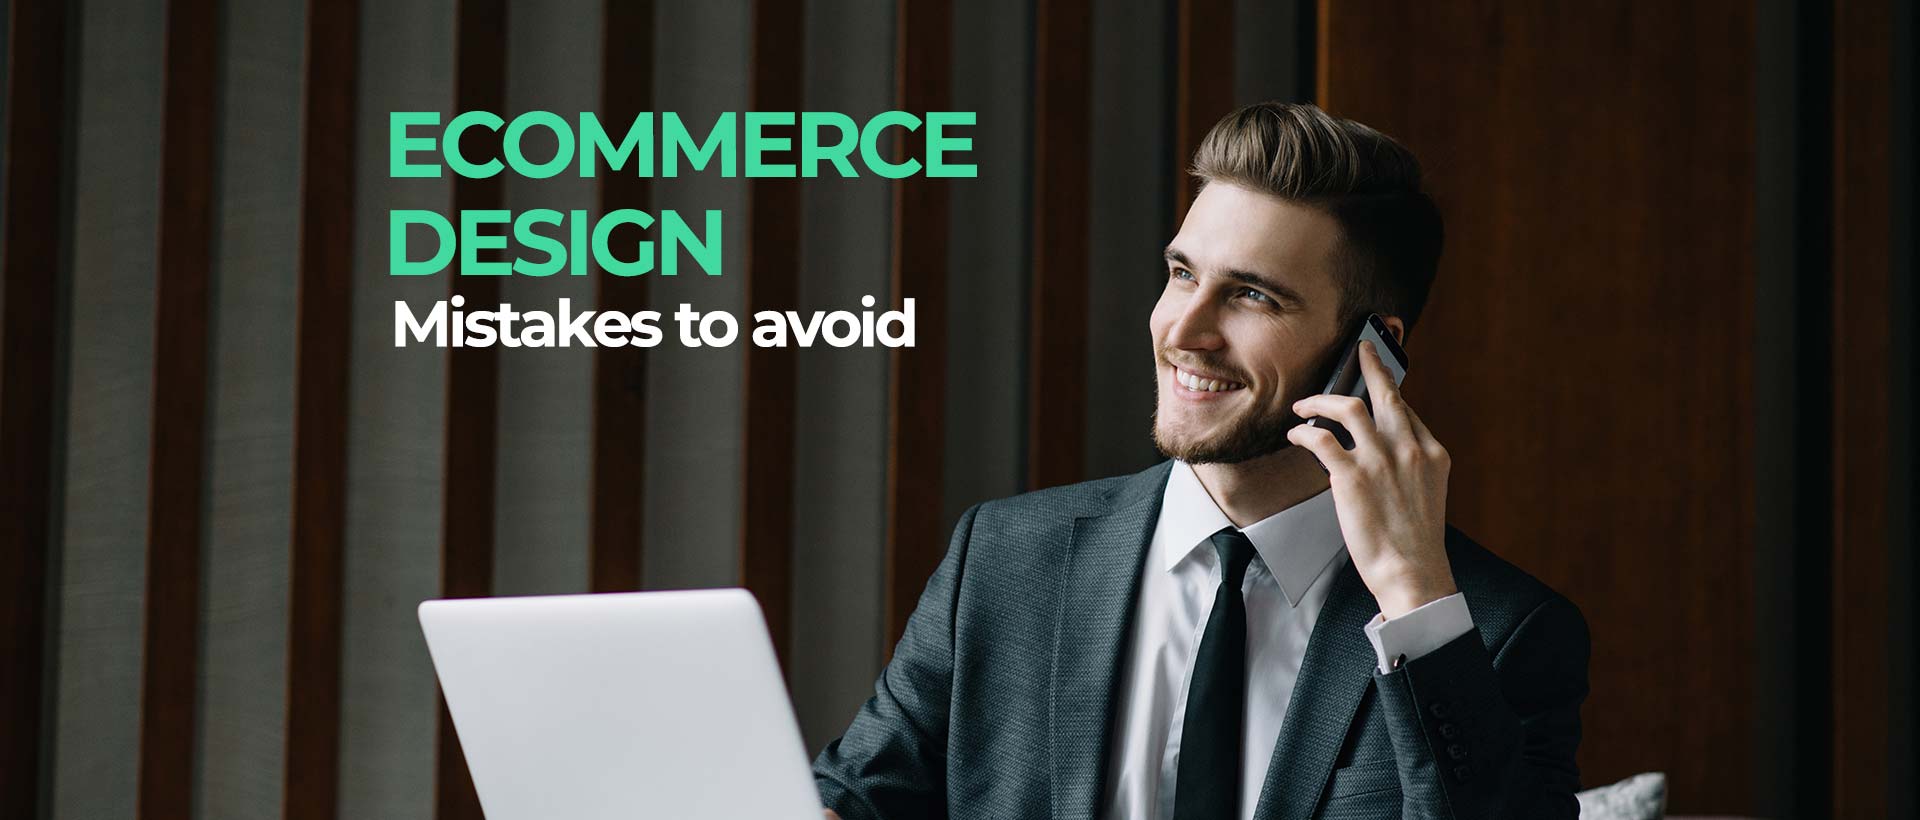 Ecommerce Design Mistakes to Avoid